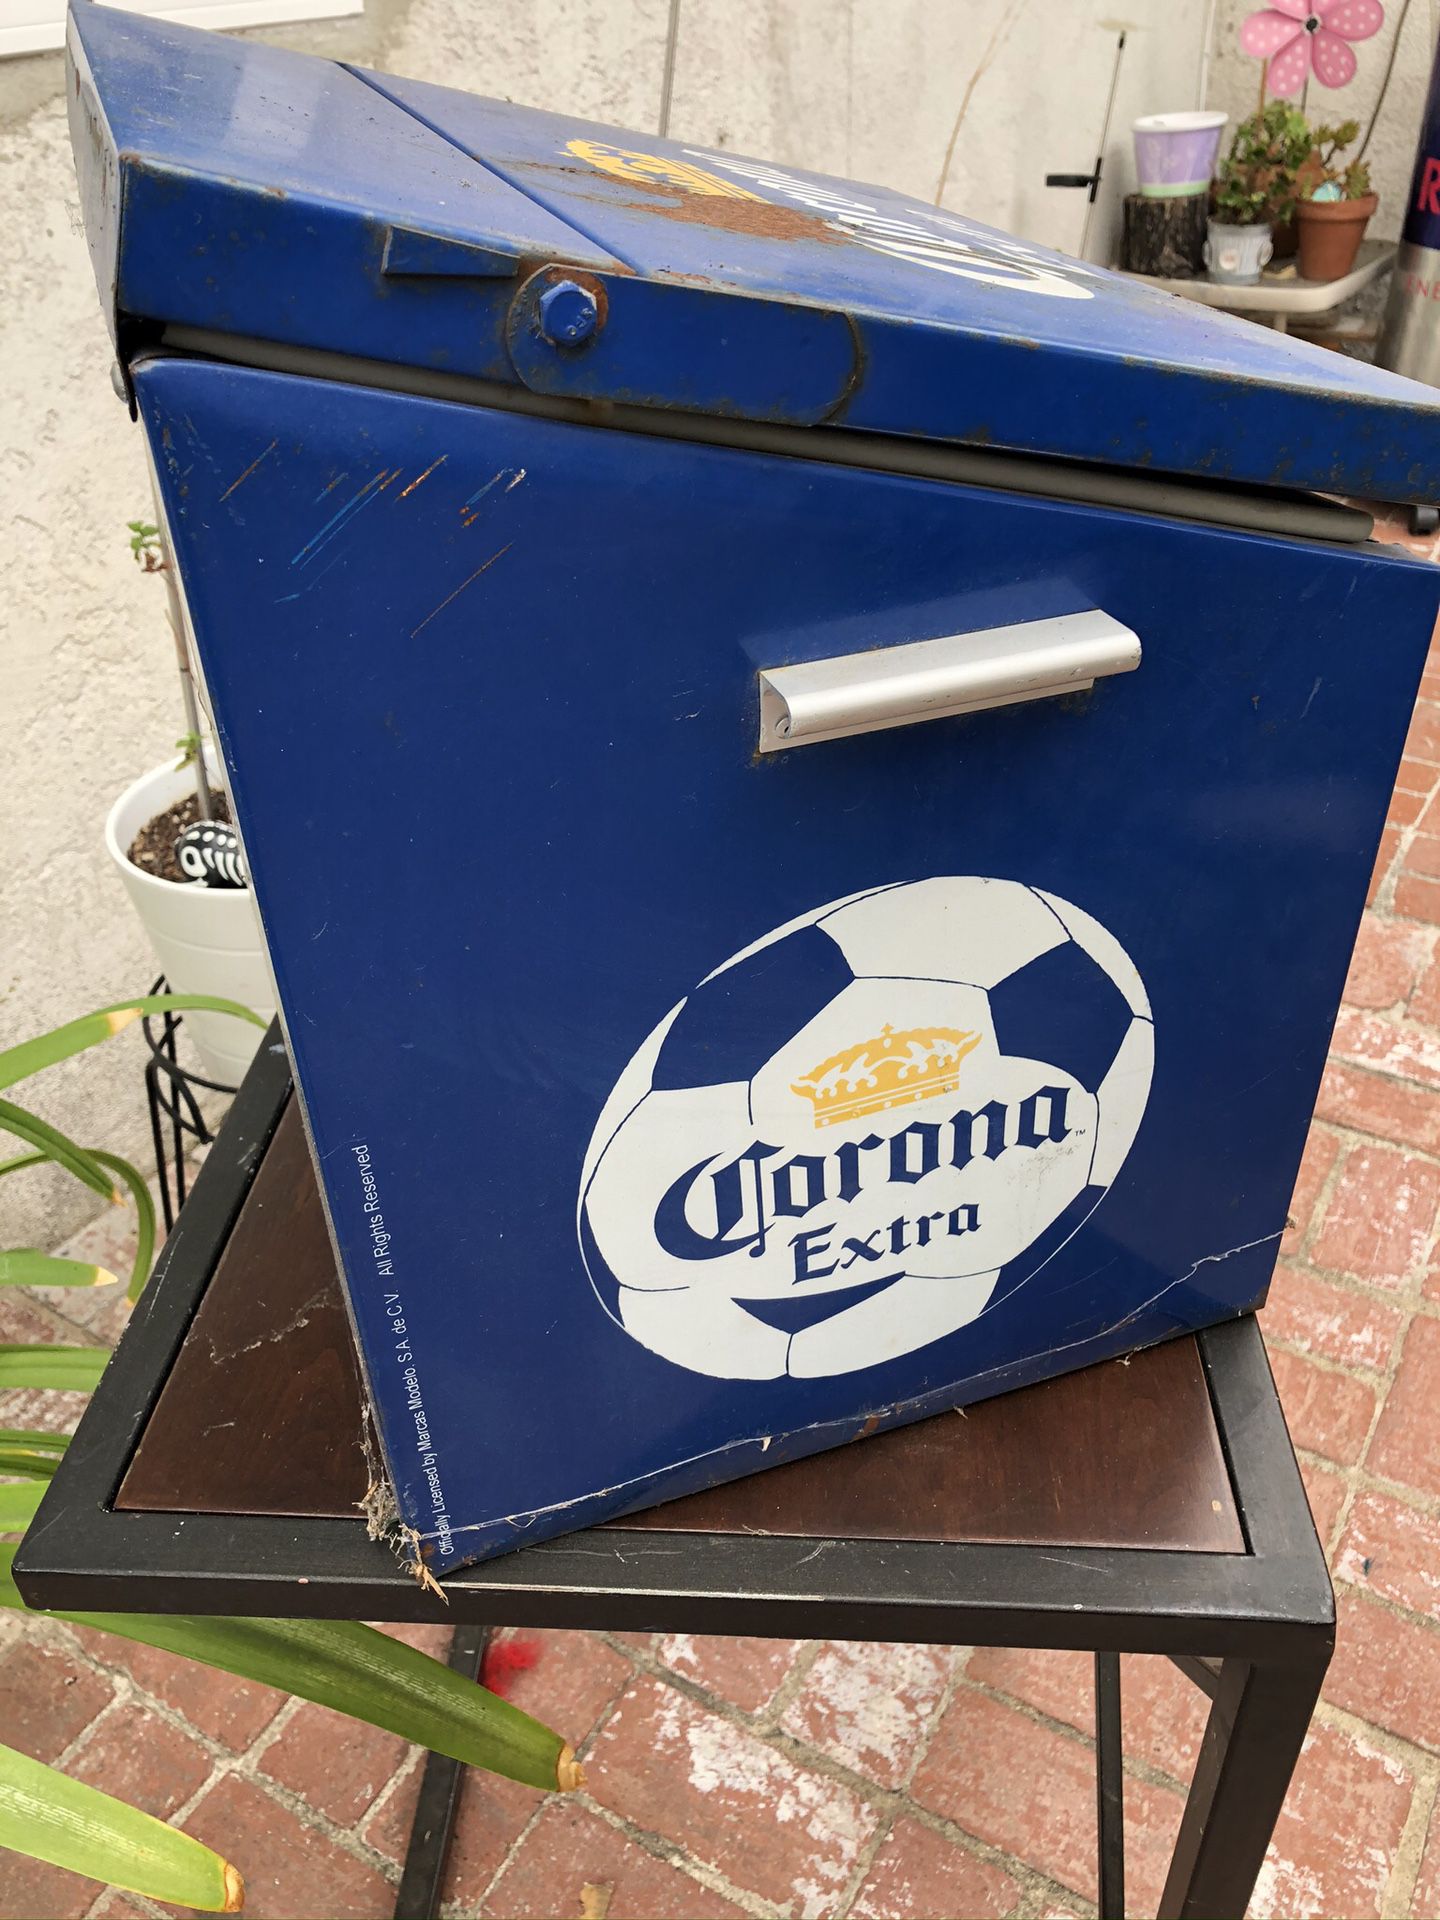 Dodge blue Corona extra futbol metal ice cooler - SEE MY OTHER OFFERS